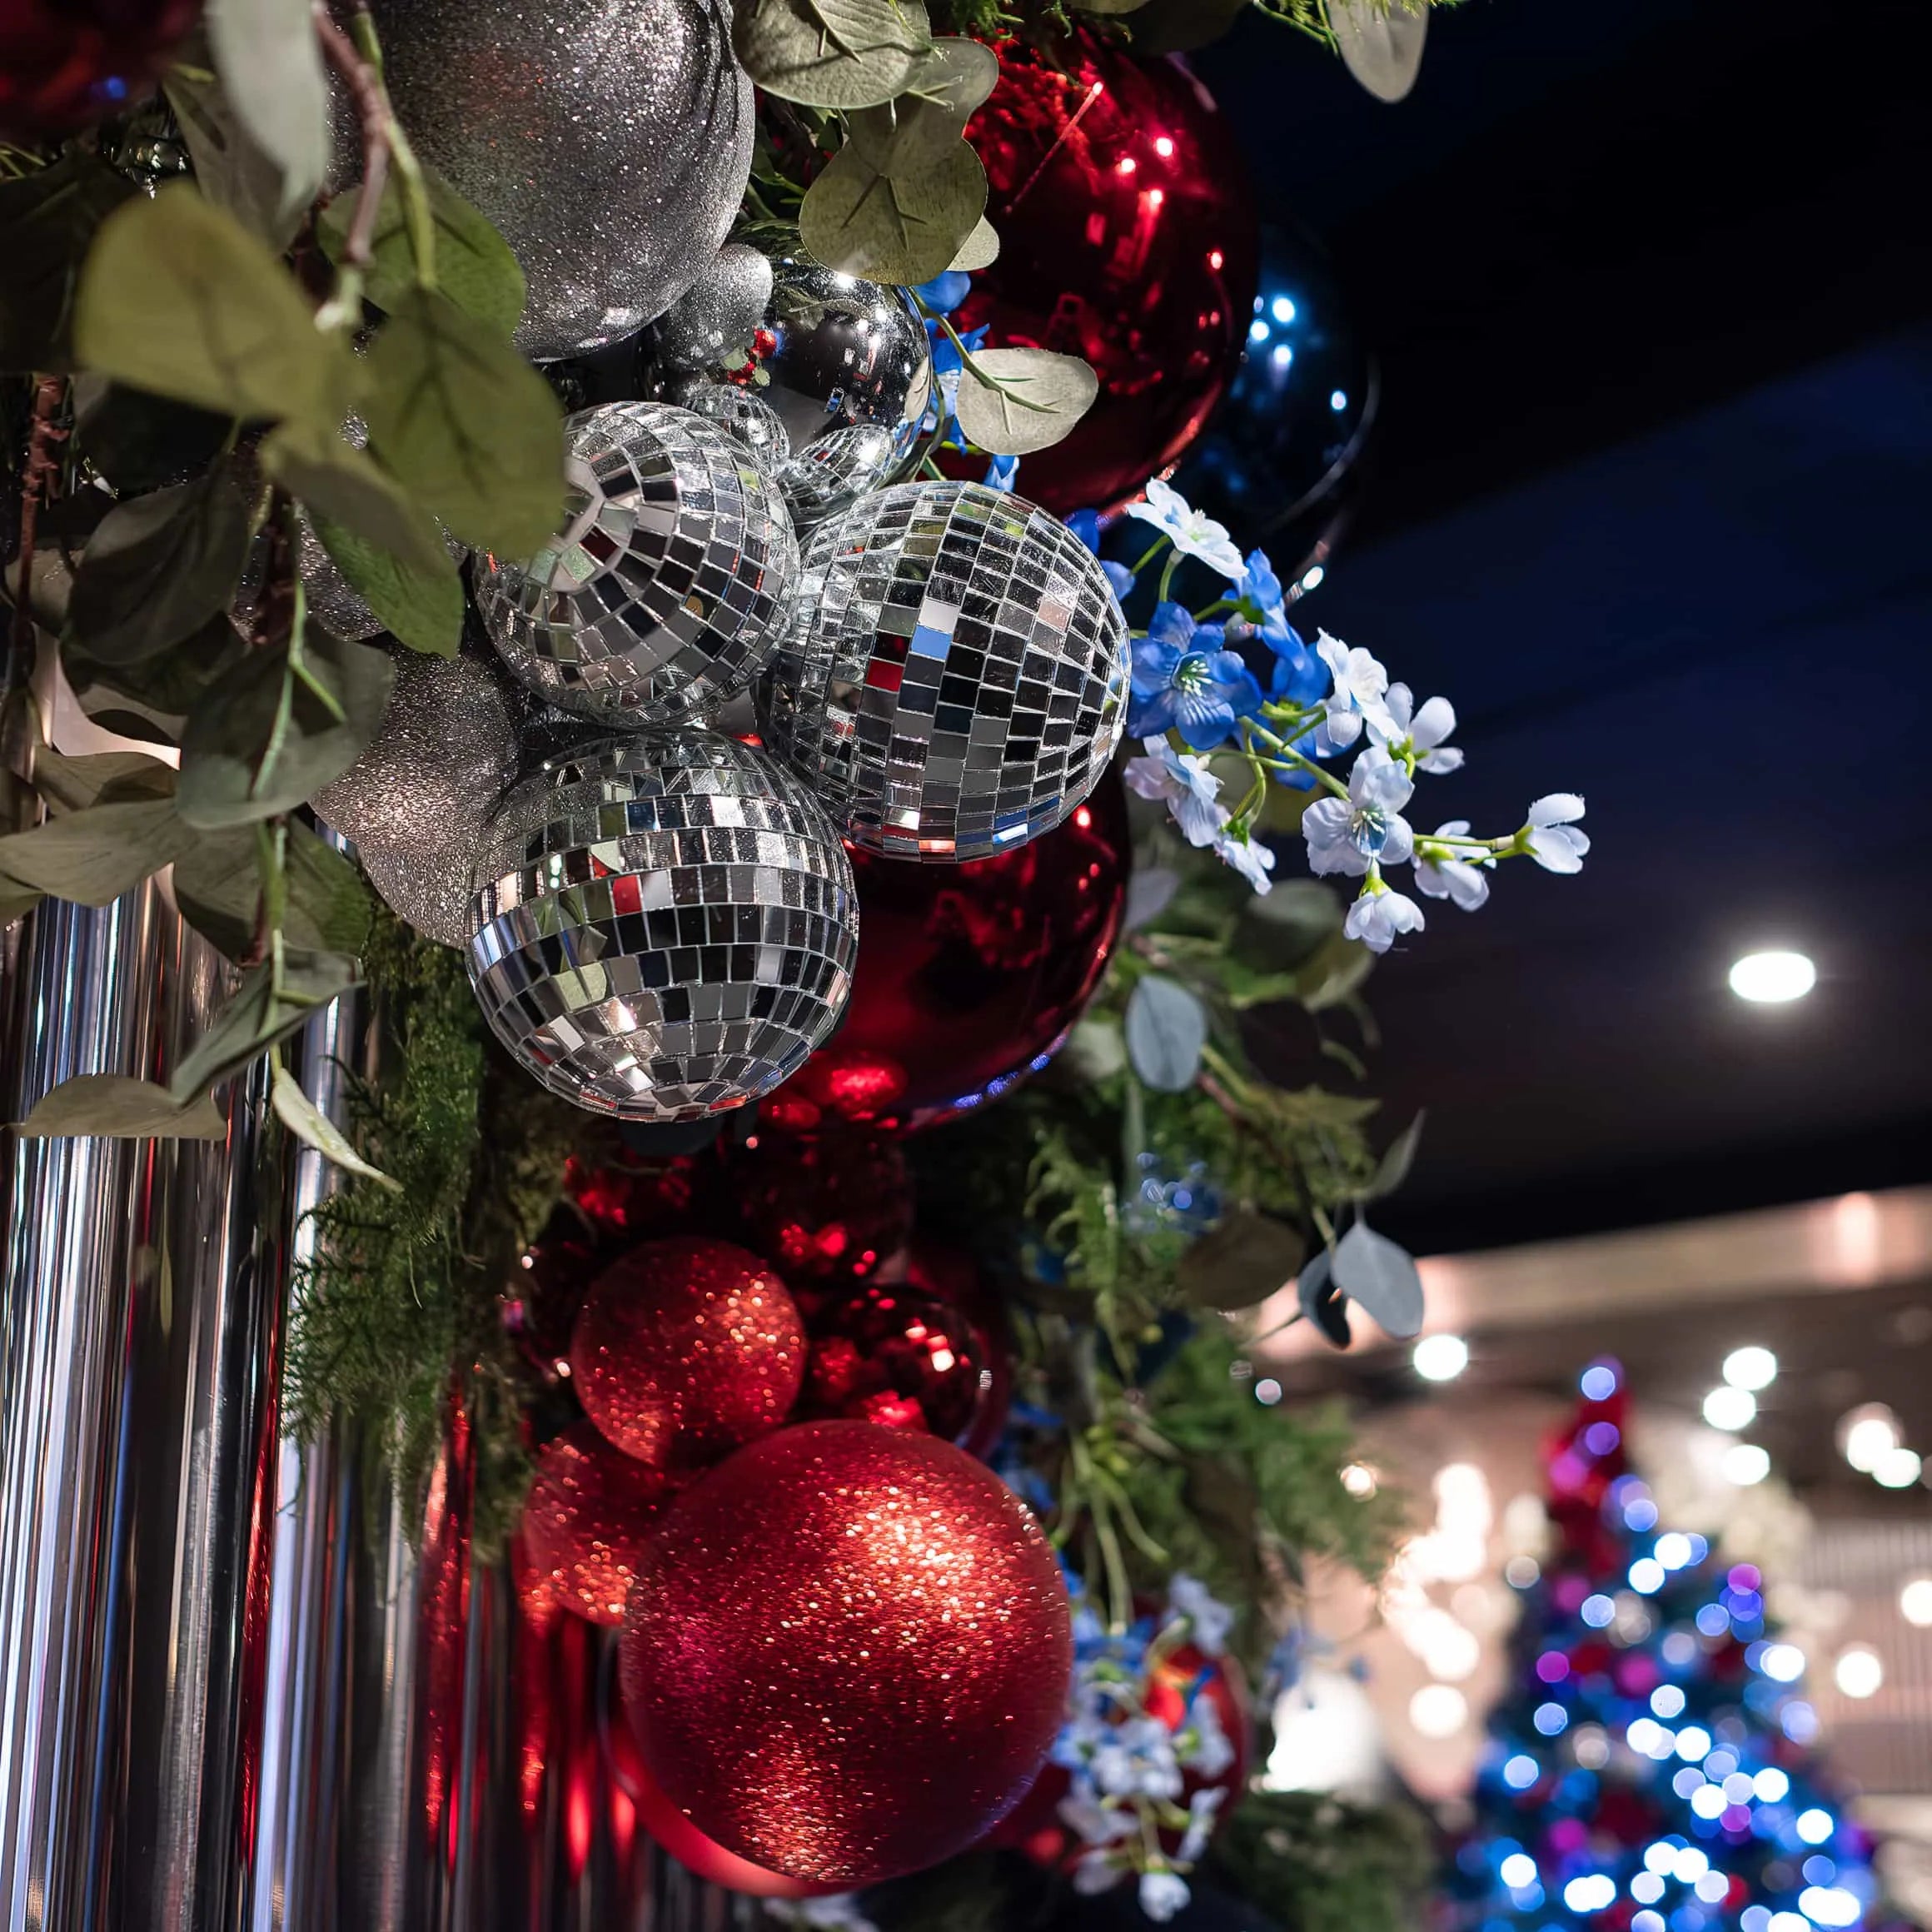 Side view of a Christmas garland on a shiny metal backdrop at STK Steakhouse, featuring glittering disco balls, red baubles, and delicate blue flowers amidst greenery, with a Christmas tree in the background.